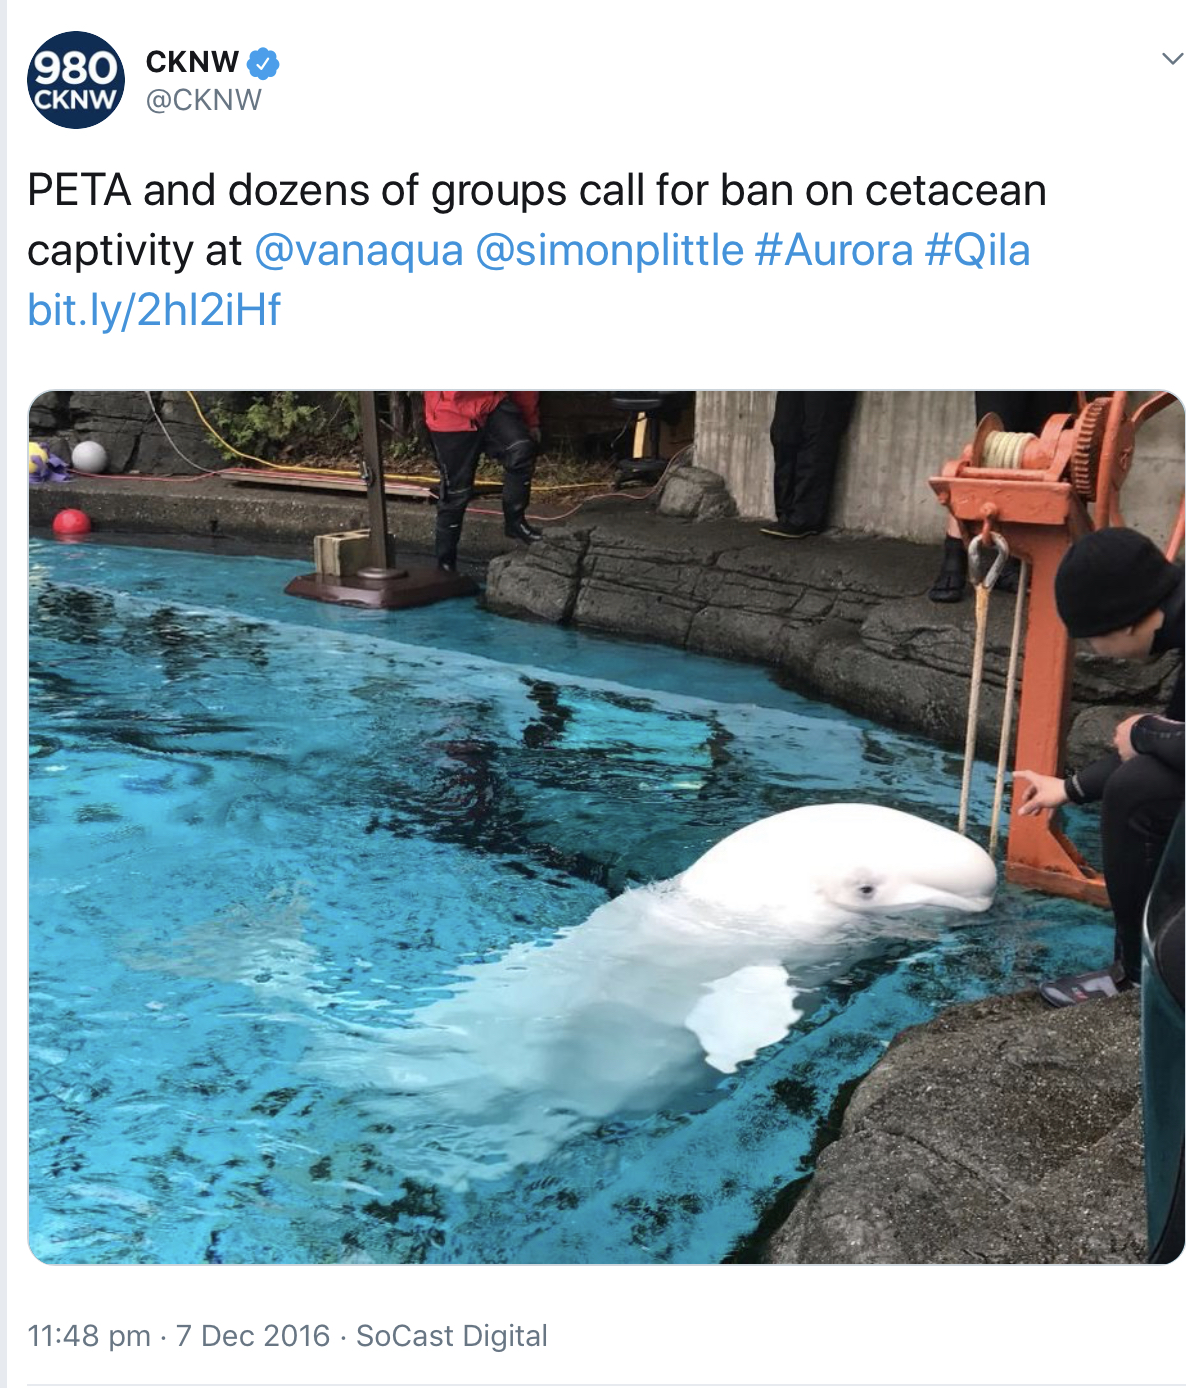 The initial motion was introduced after the two remaining beluga whales at the Vancouver Aquarium died in November 2016. Aurora, who was 29 years old, passed away only nine days after the death of her calf, 21-year-old Qila. Following their deaths, animal rights groups and activists called on the Vancouver Park Board to prohibit cetacean captivity in order to end the tragic and unnecessary suffering endured by animals like these belugas.